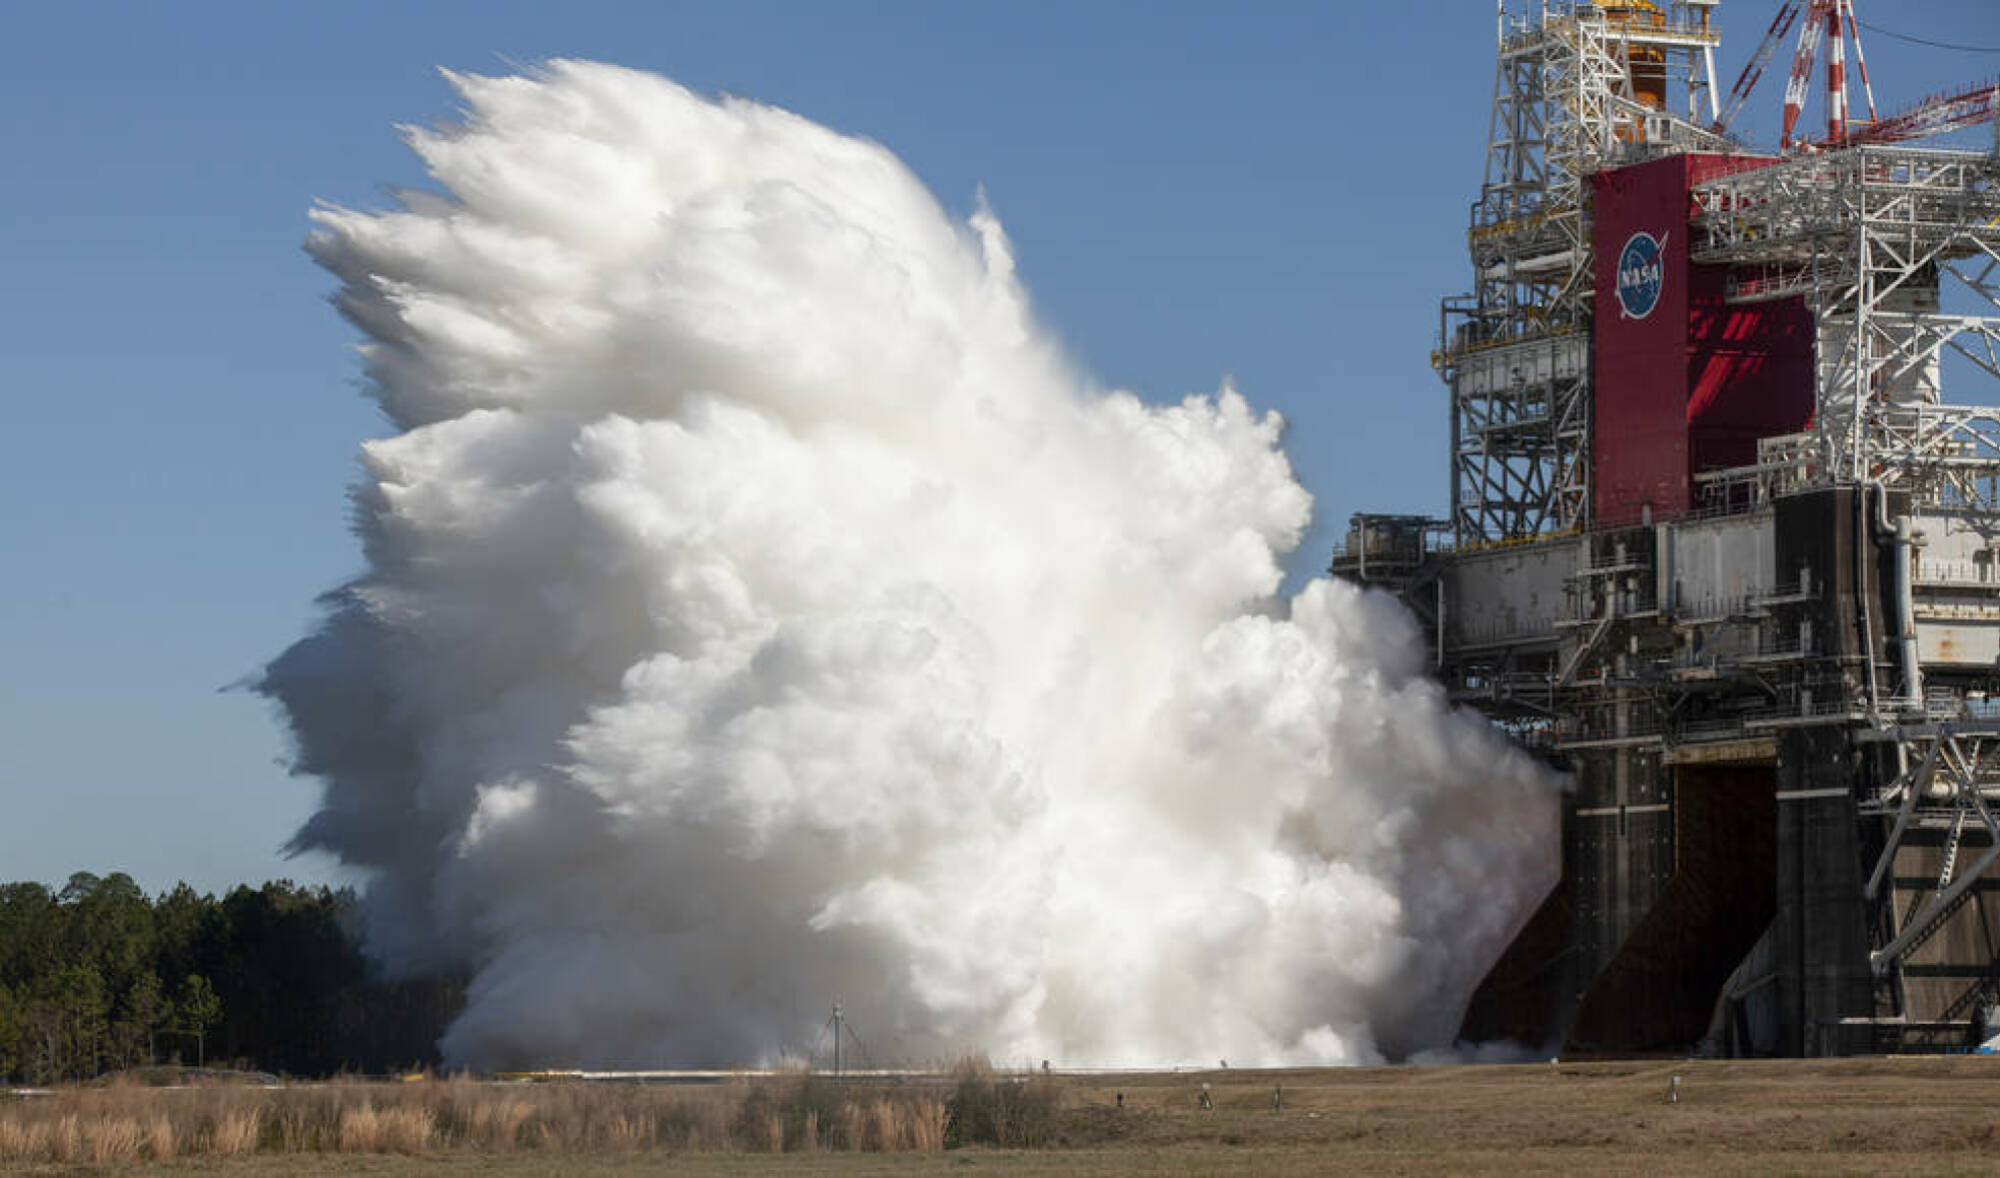 the SLS rocket's four main engines firing in a thrust test